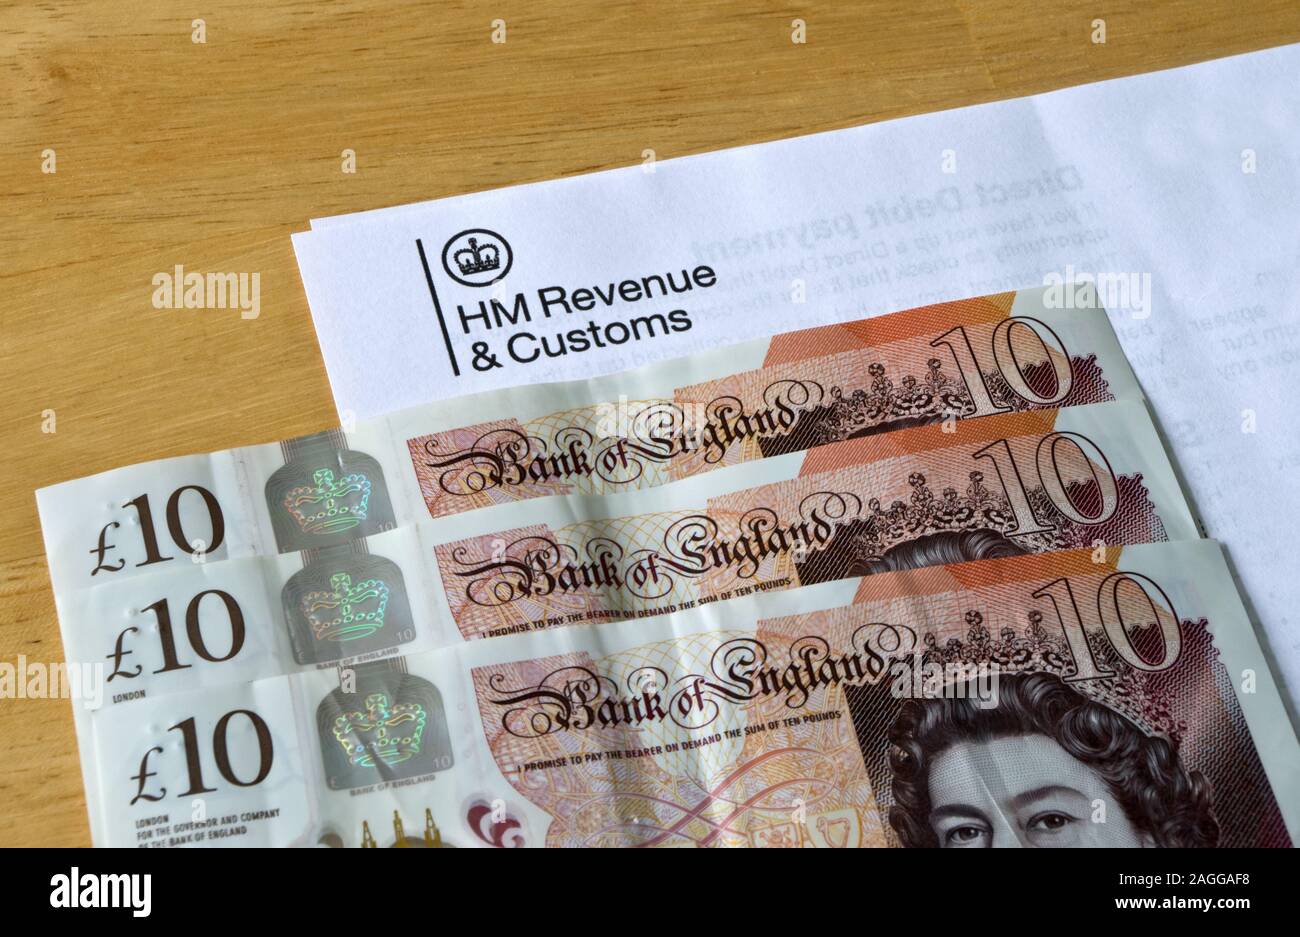 HM Revenue and Customs With Sterling Cash Money, UK Stock Photo